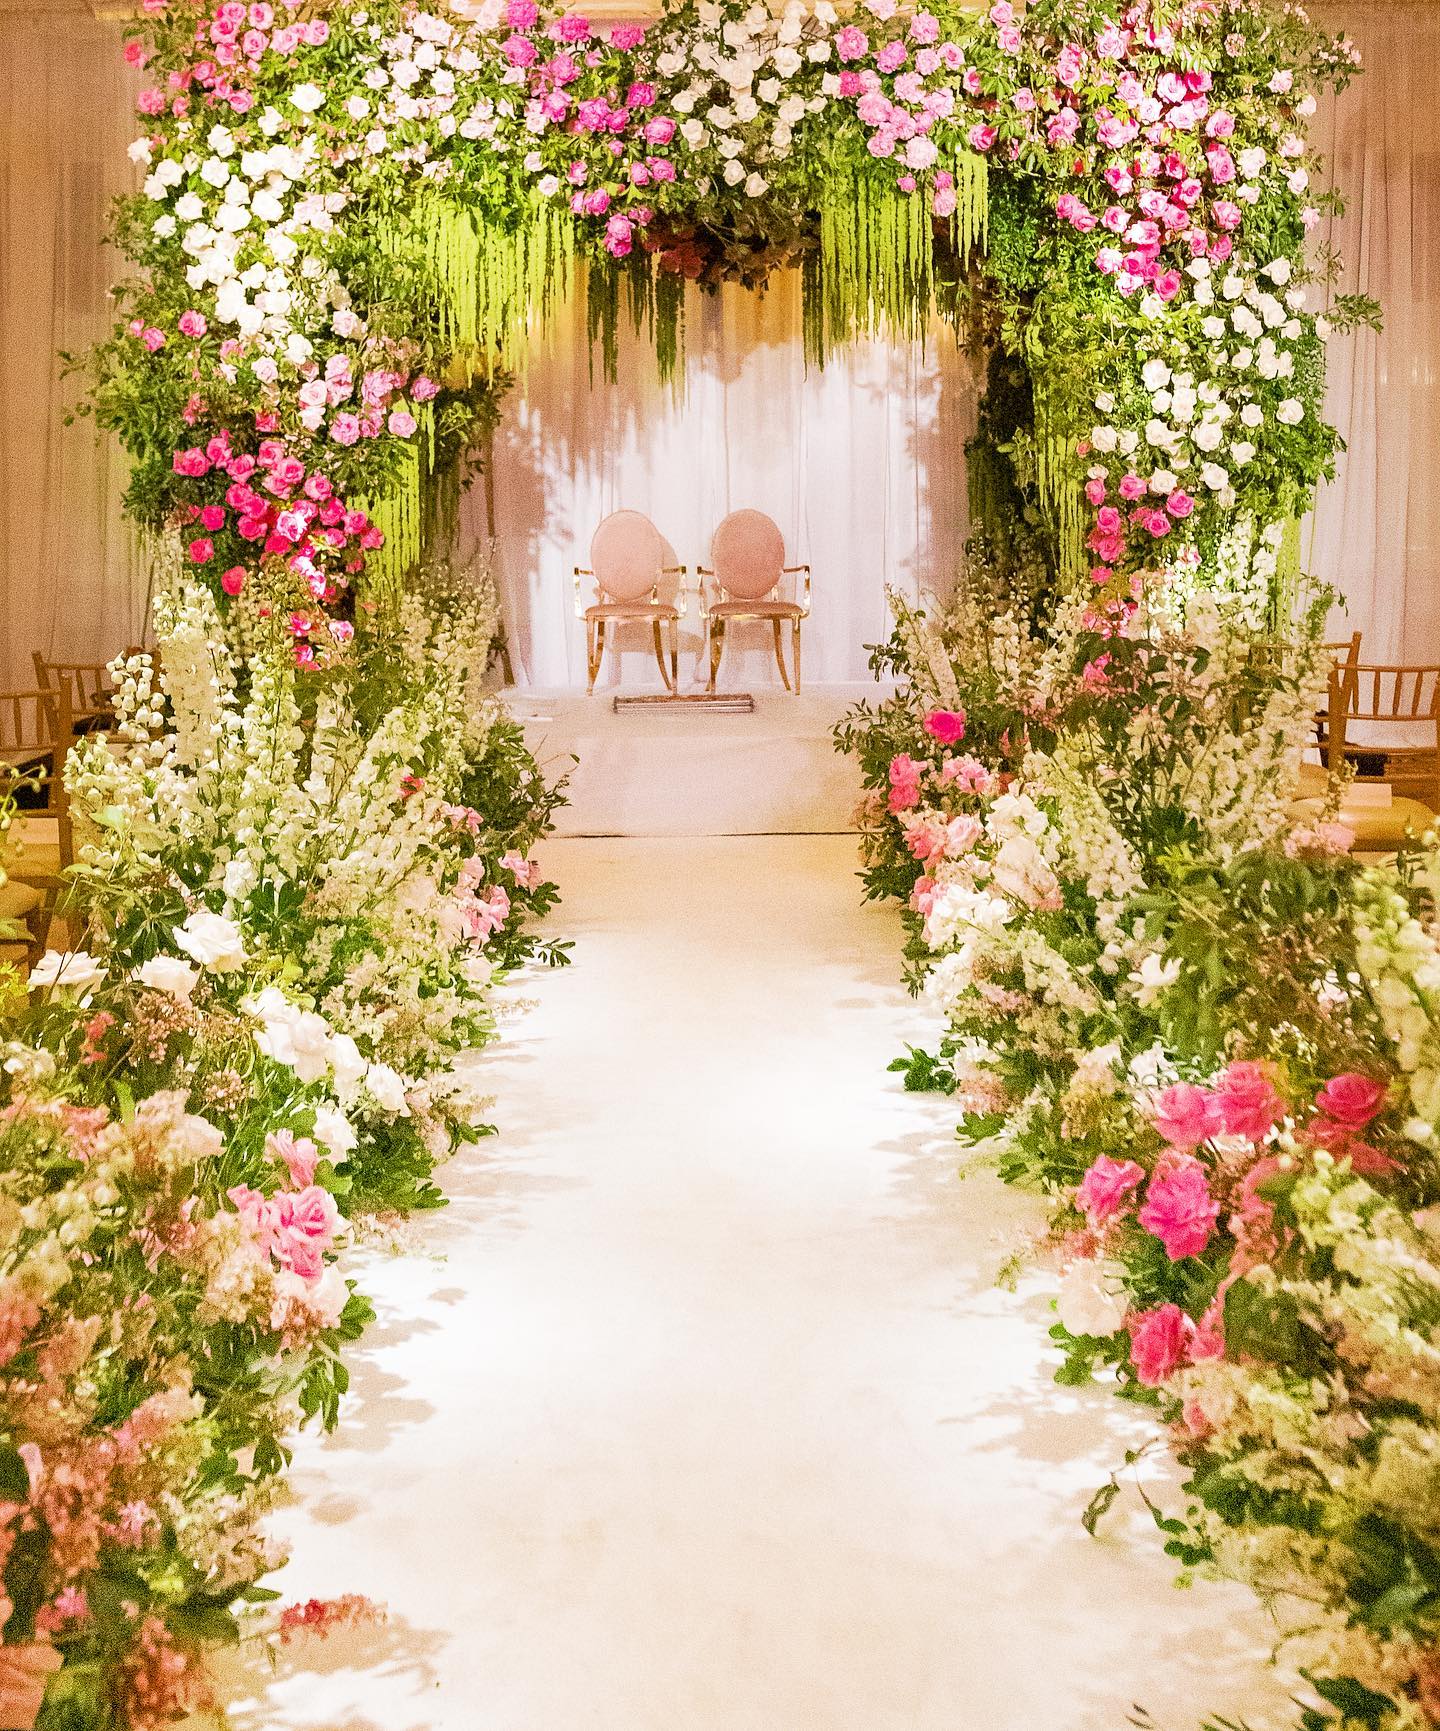 6 Incredible Wedding Flower Decoration Ideas that you Should Know